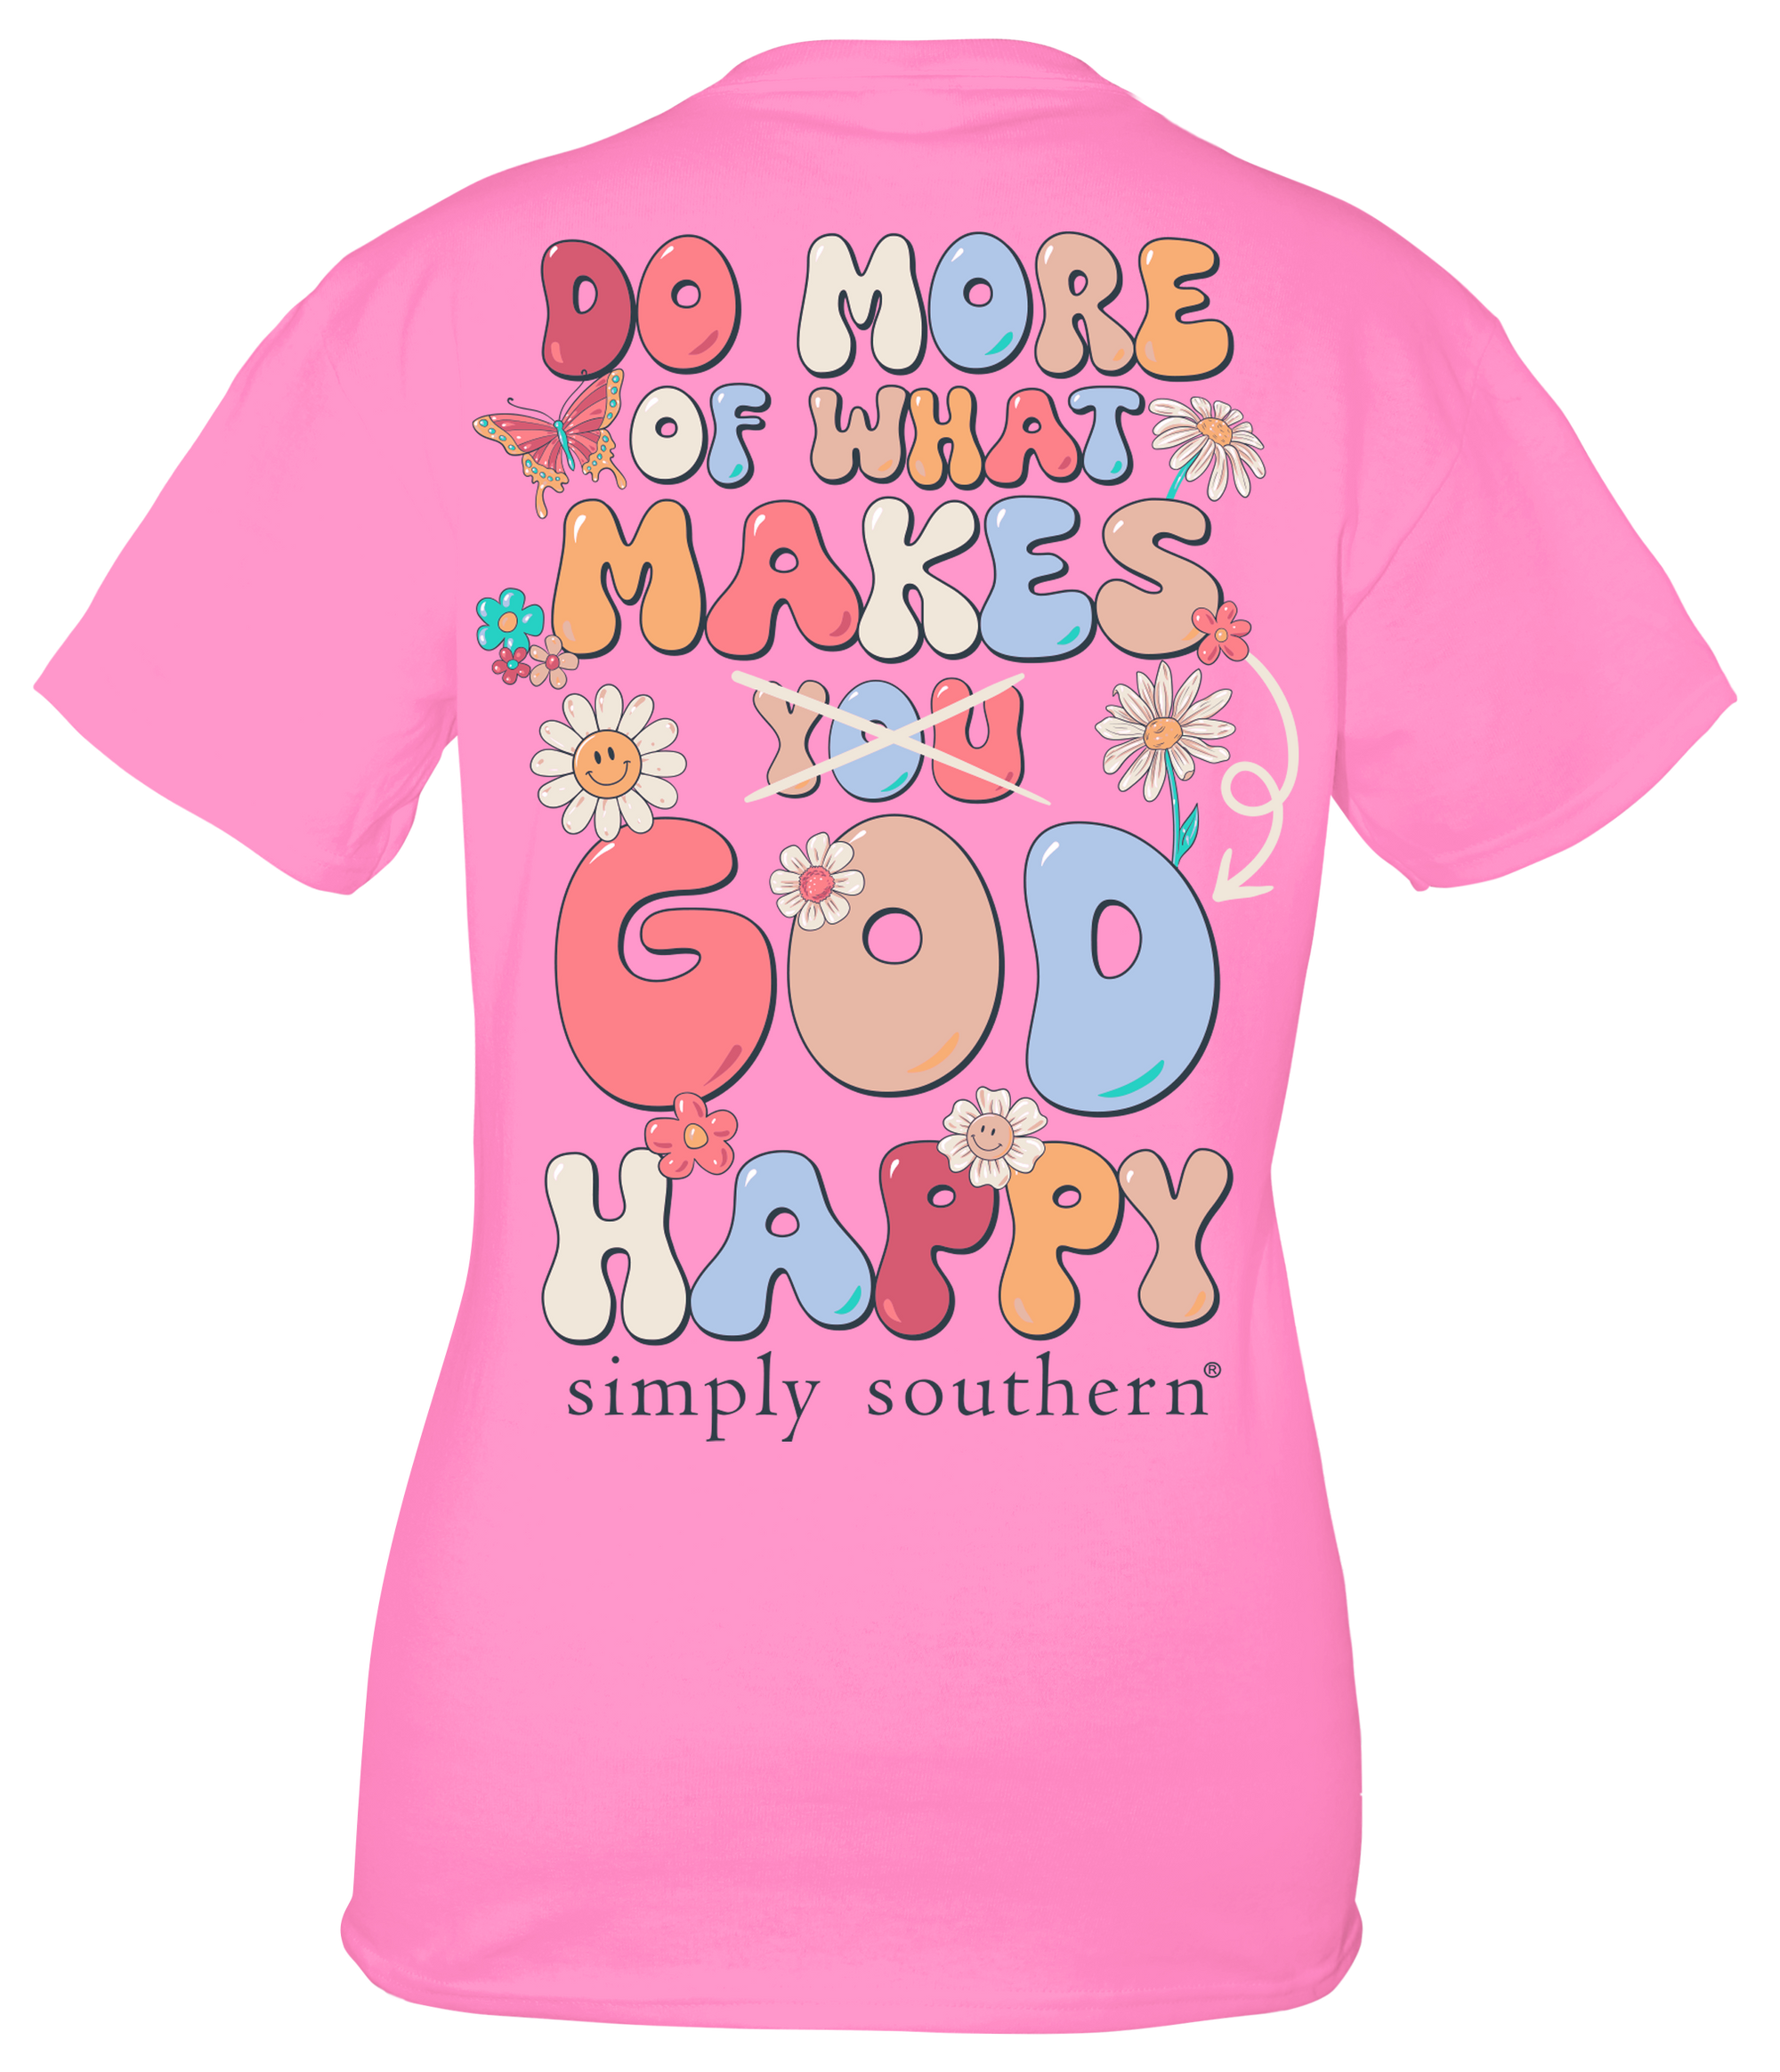 Simply Southern Makes God Happy T-Shirt